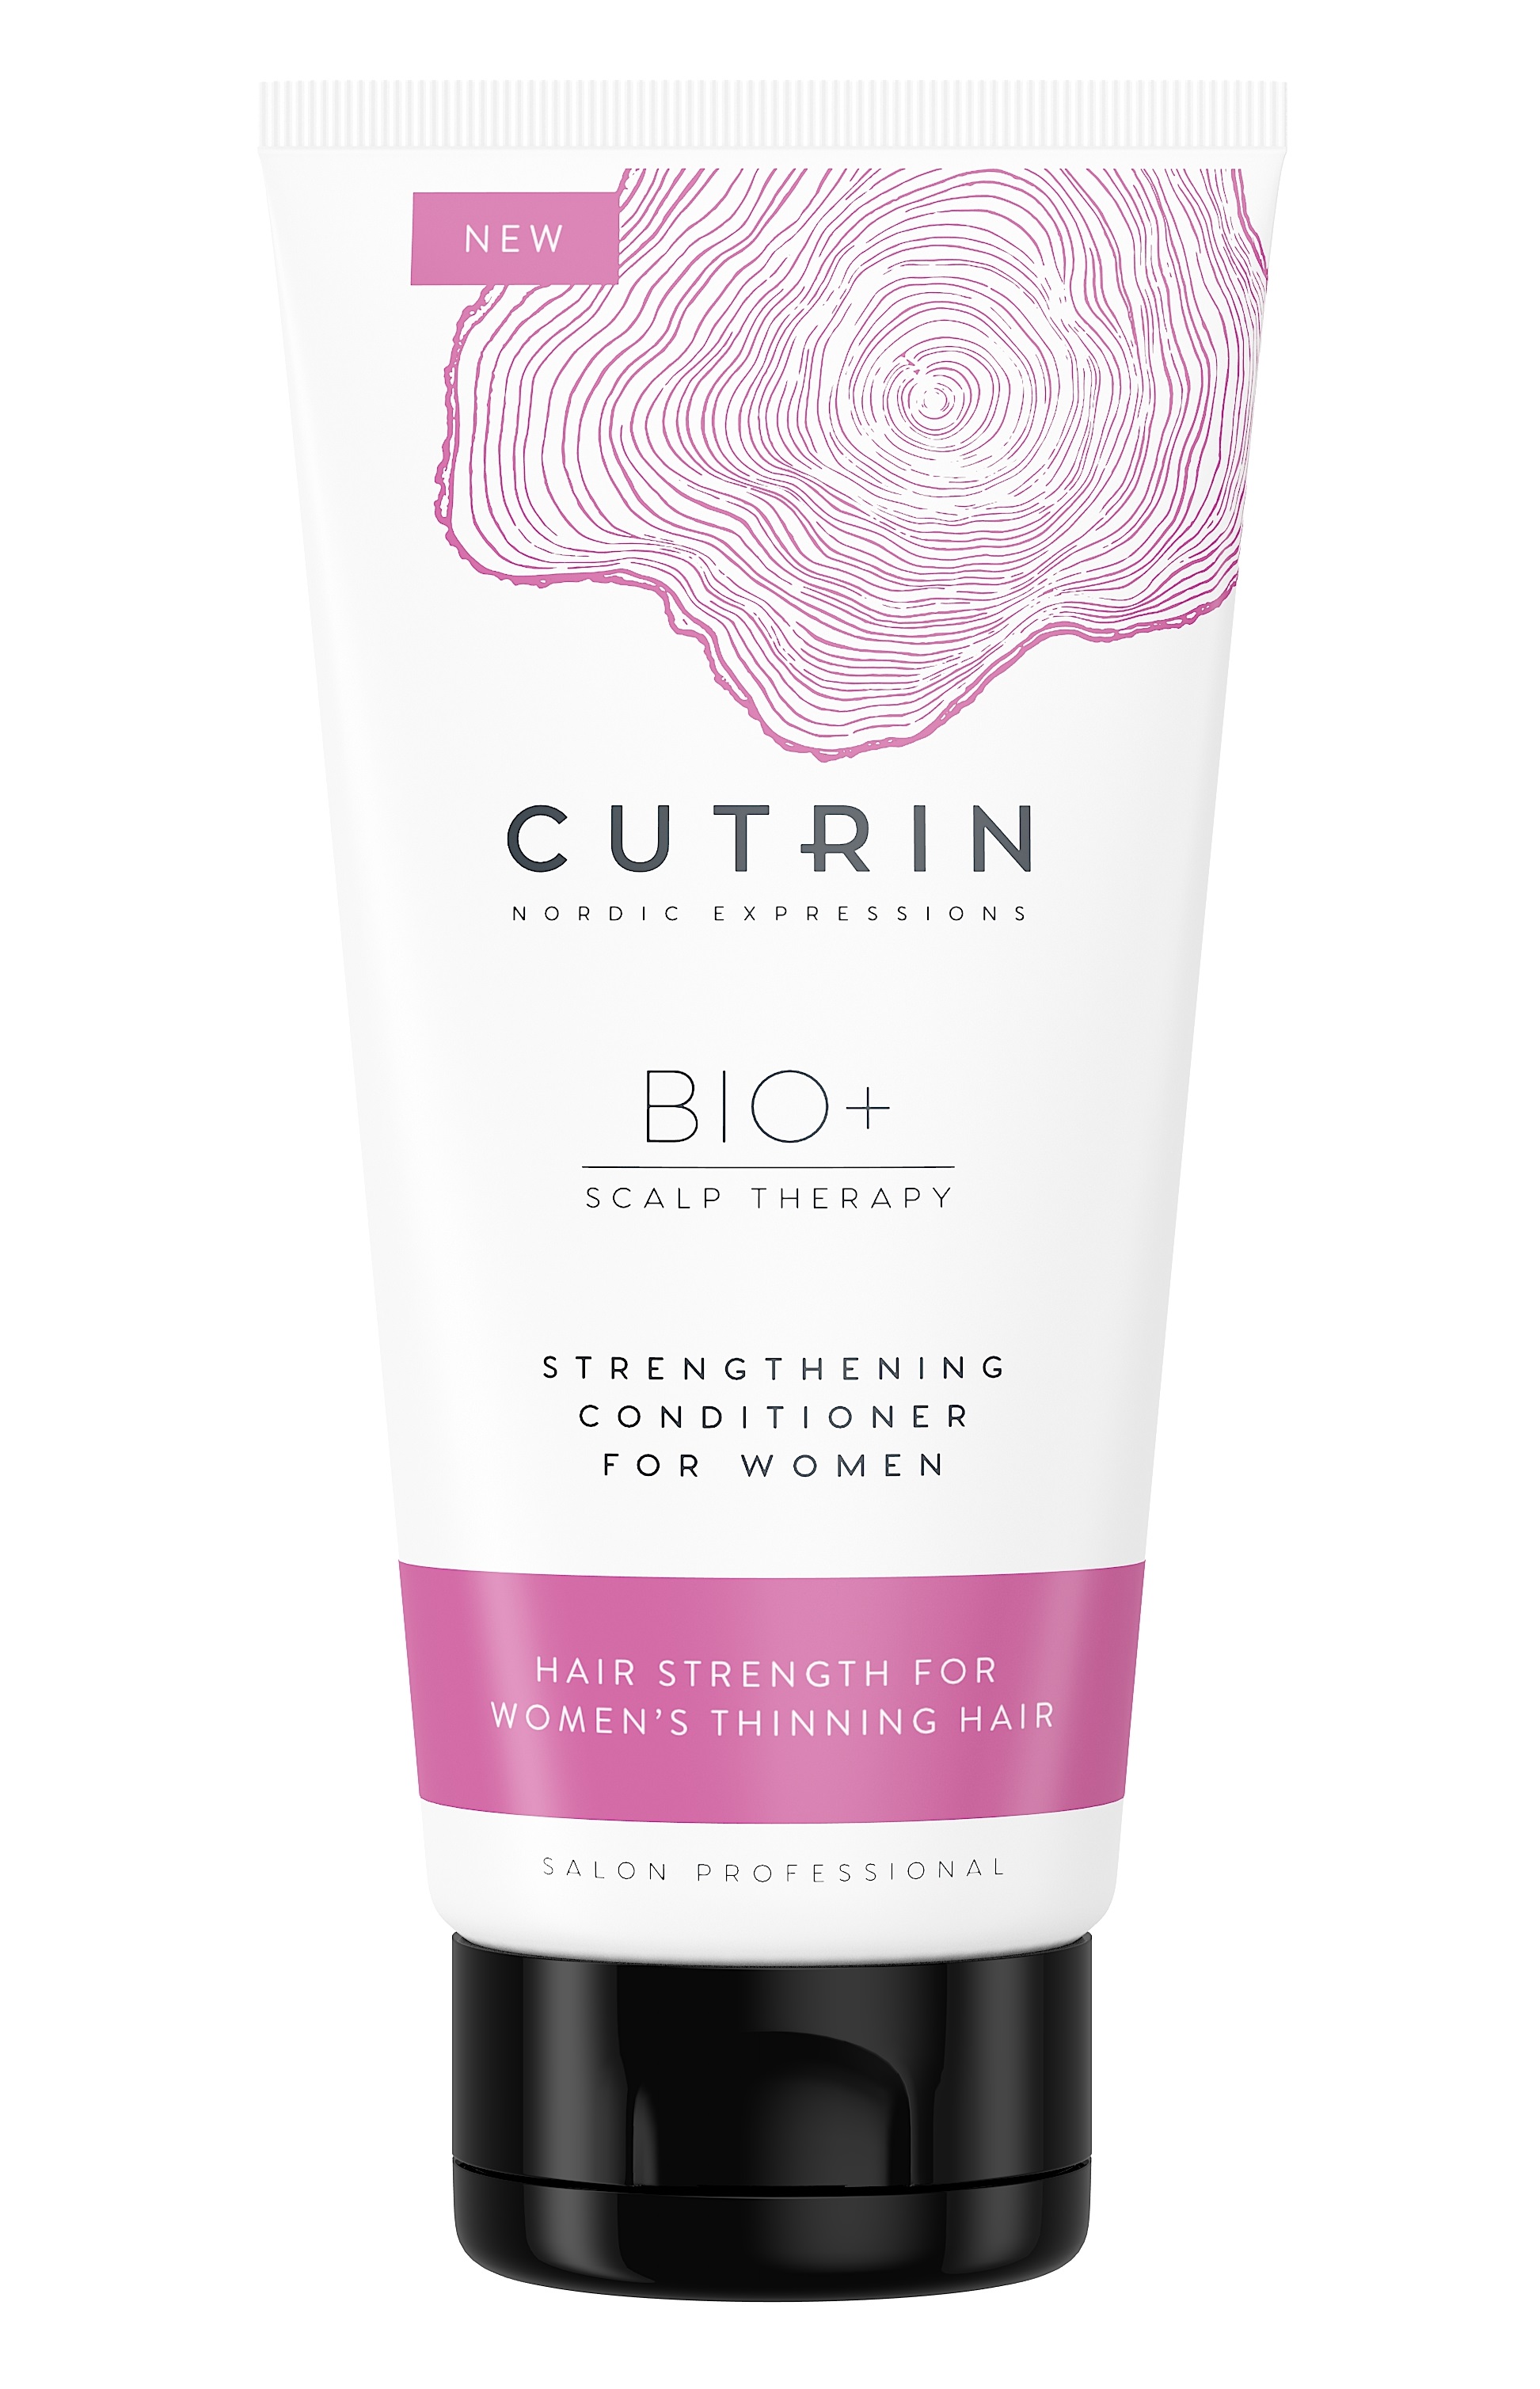 Powered by Nordic nature - CUTRIN